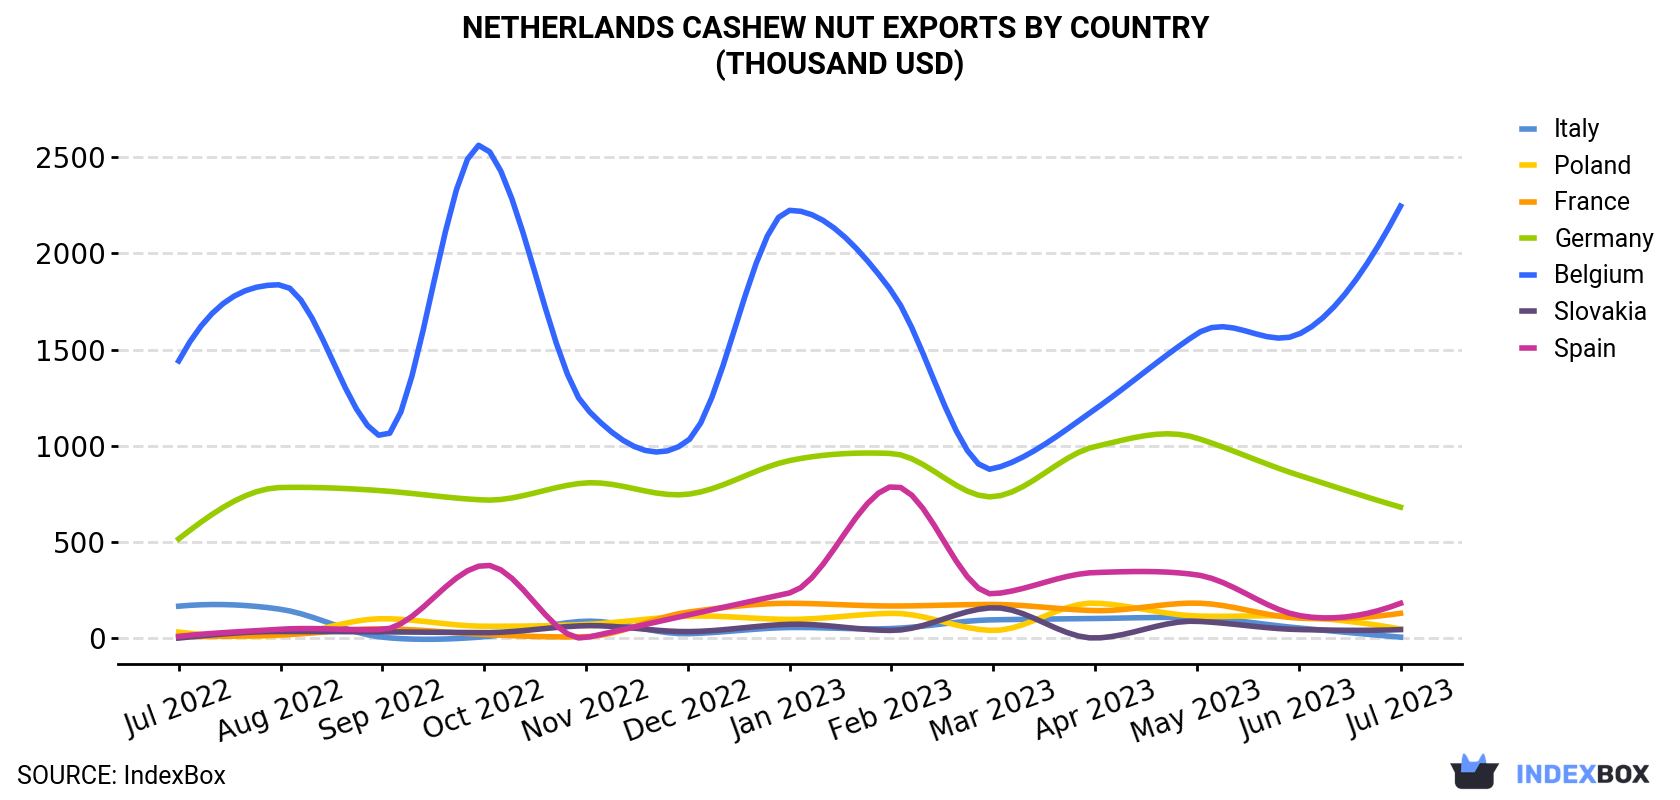 Netherlands Cashew Nut Exports By Country (Thousand USD)